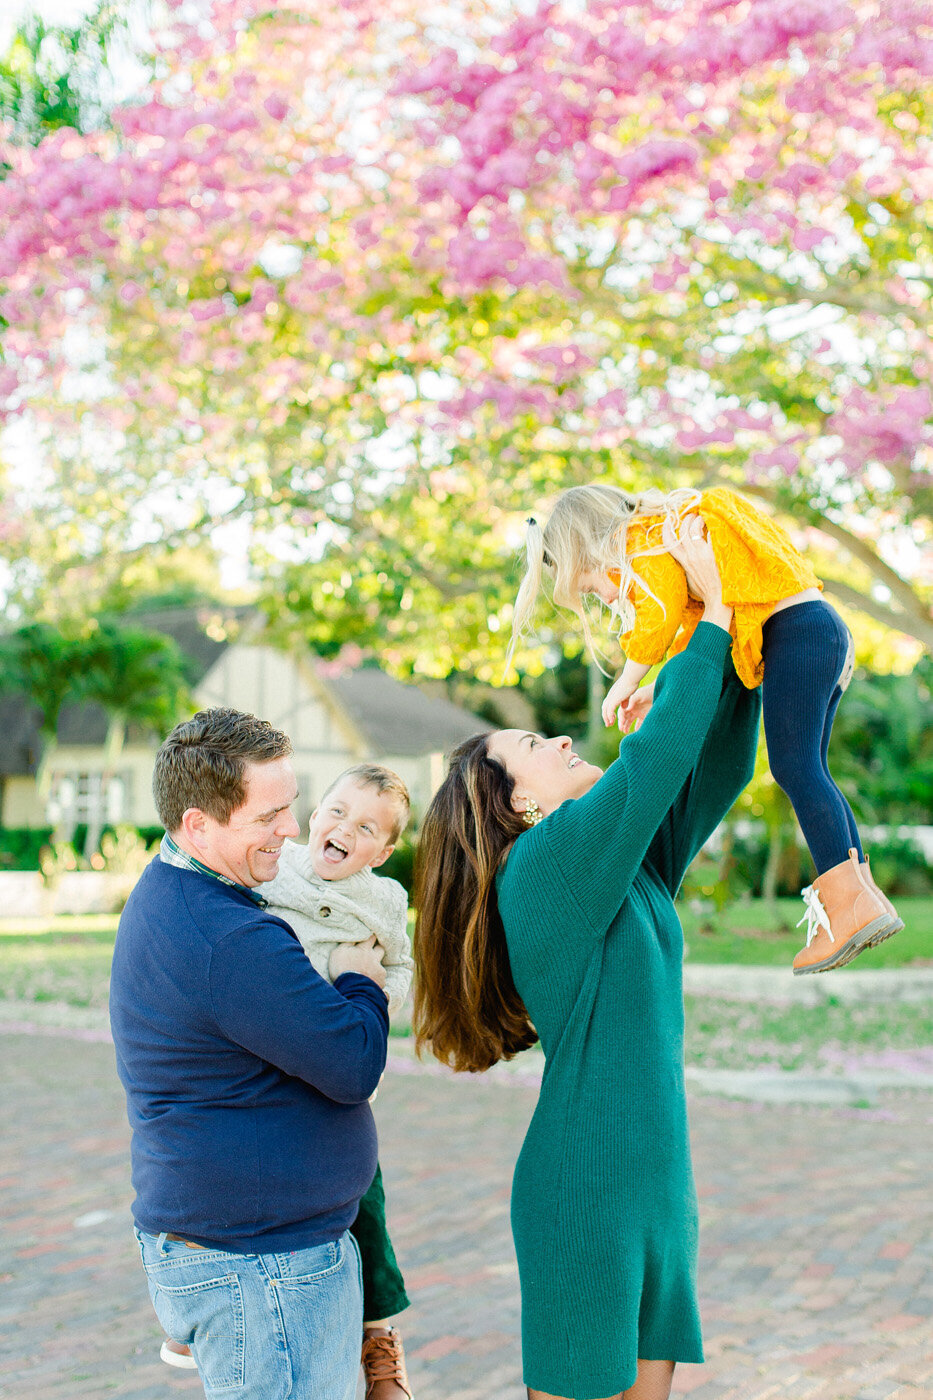 Tampa Family Photographer - Ailyn LaTorre 04